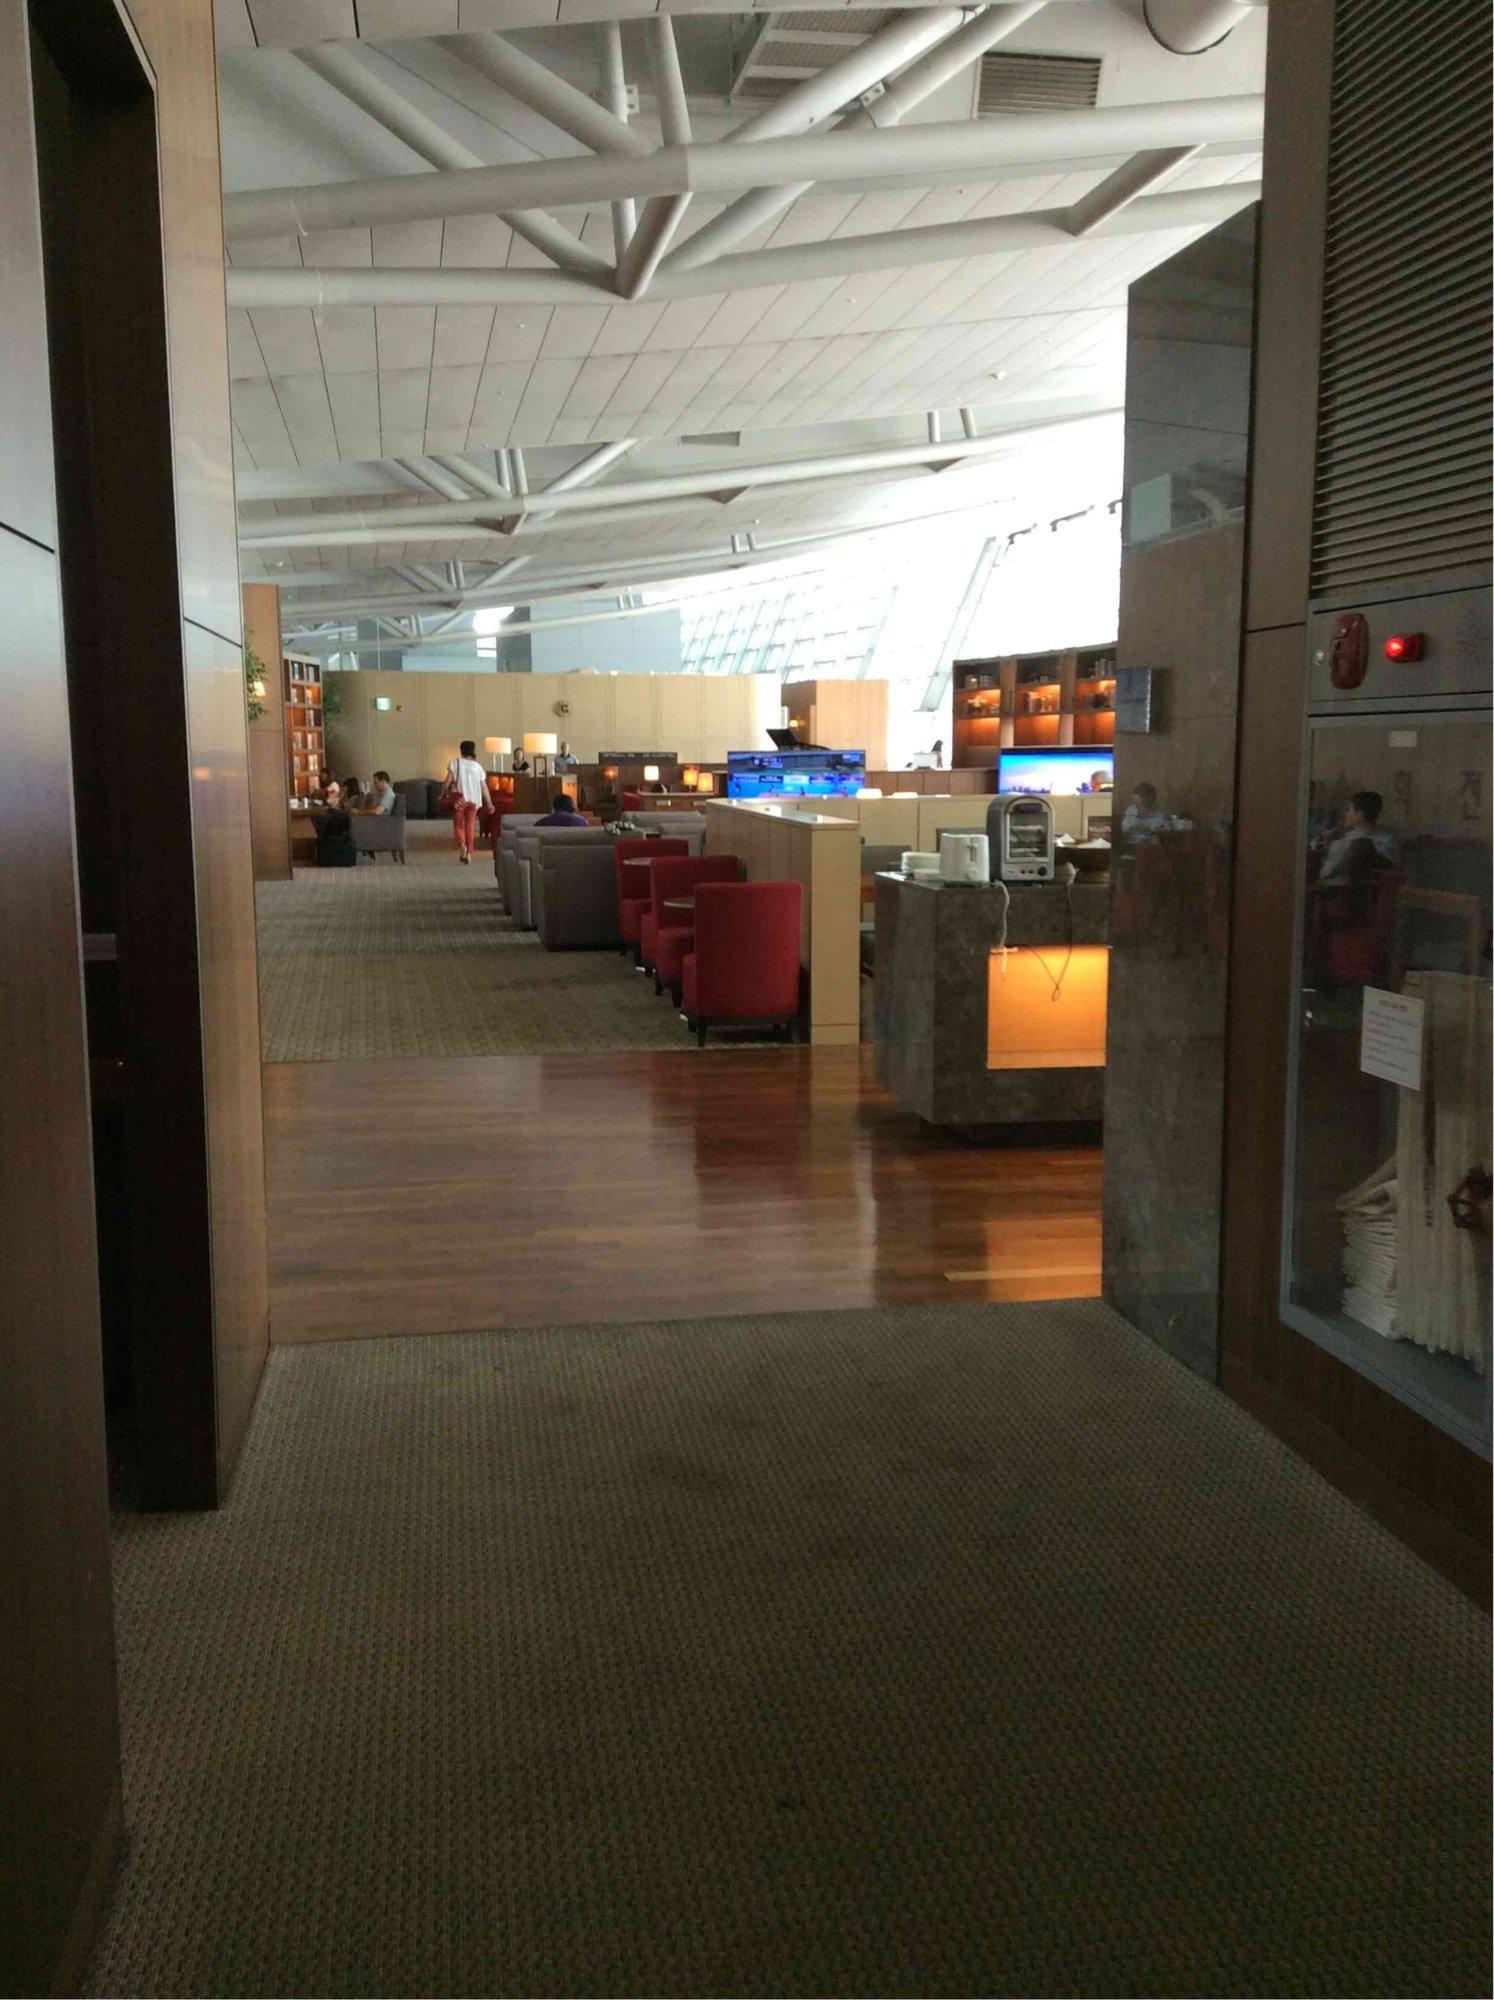 Asiana Airlines Business Class Lounge (East) image 40 of 59